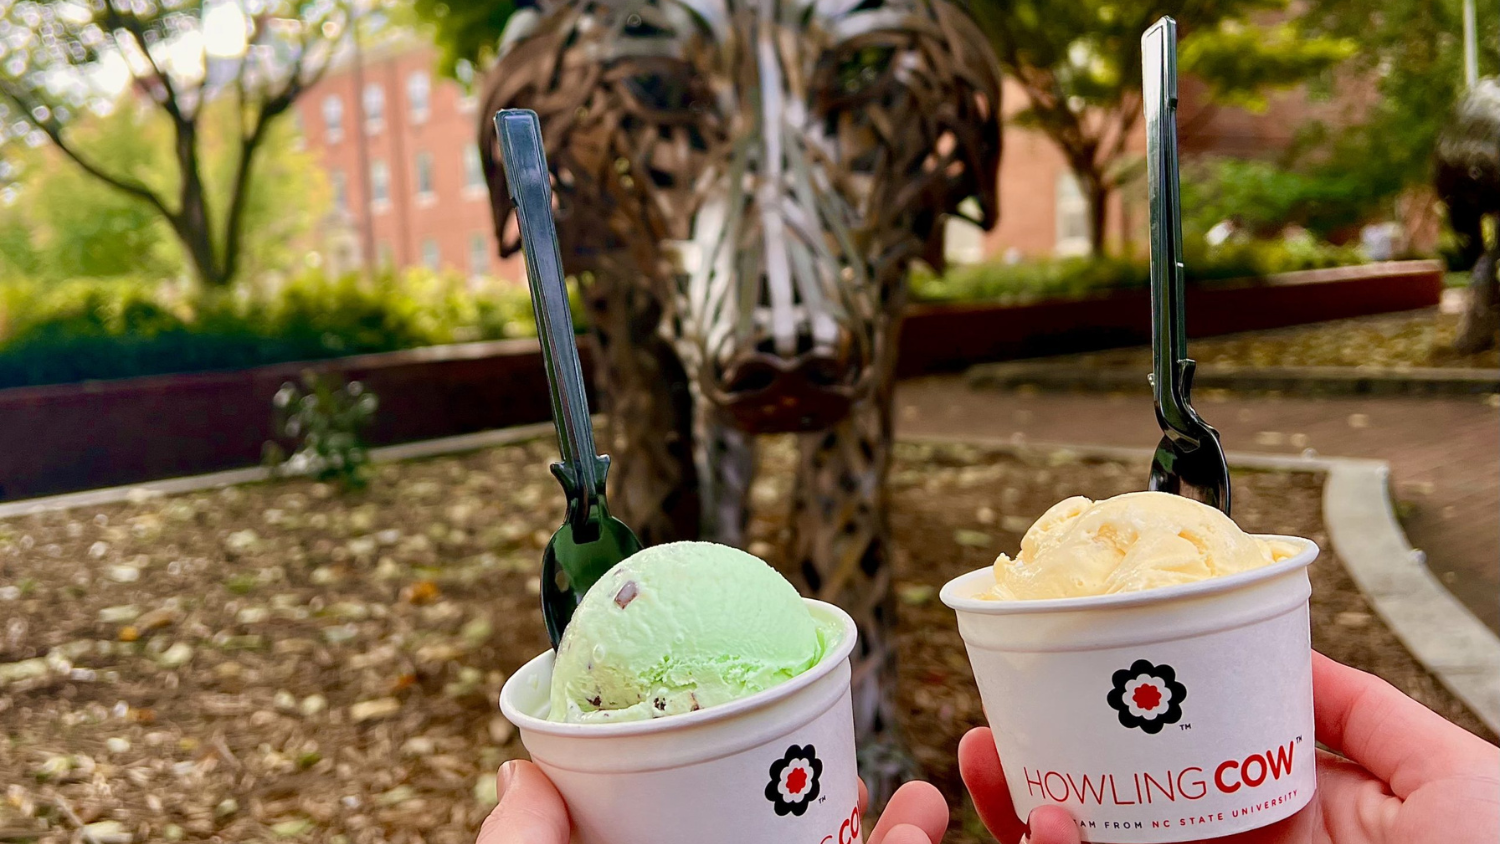 Howling cow ice cream in front of Talley wolves